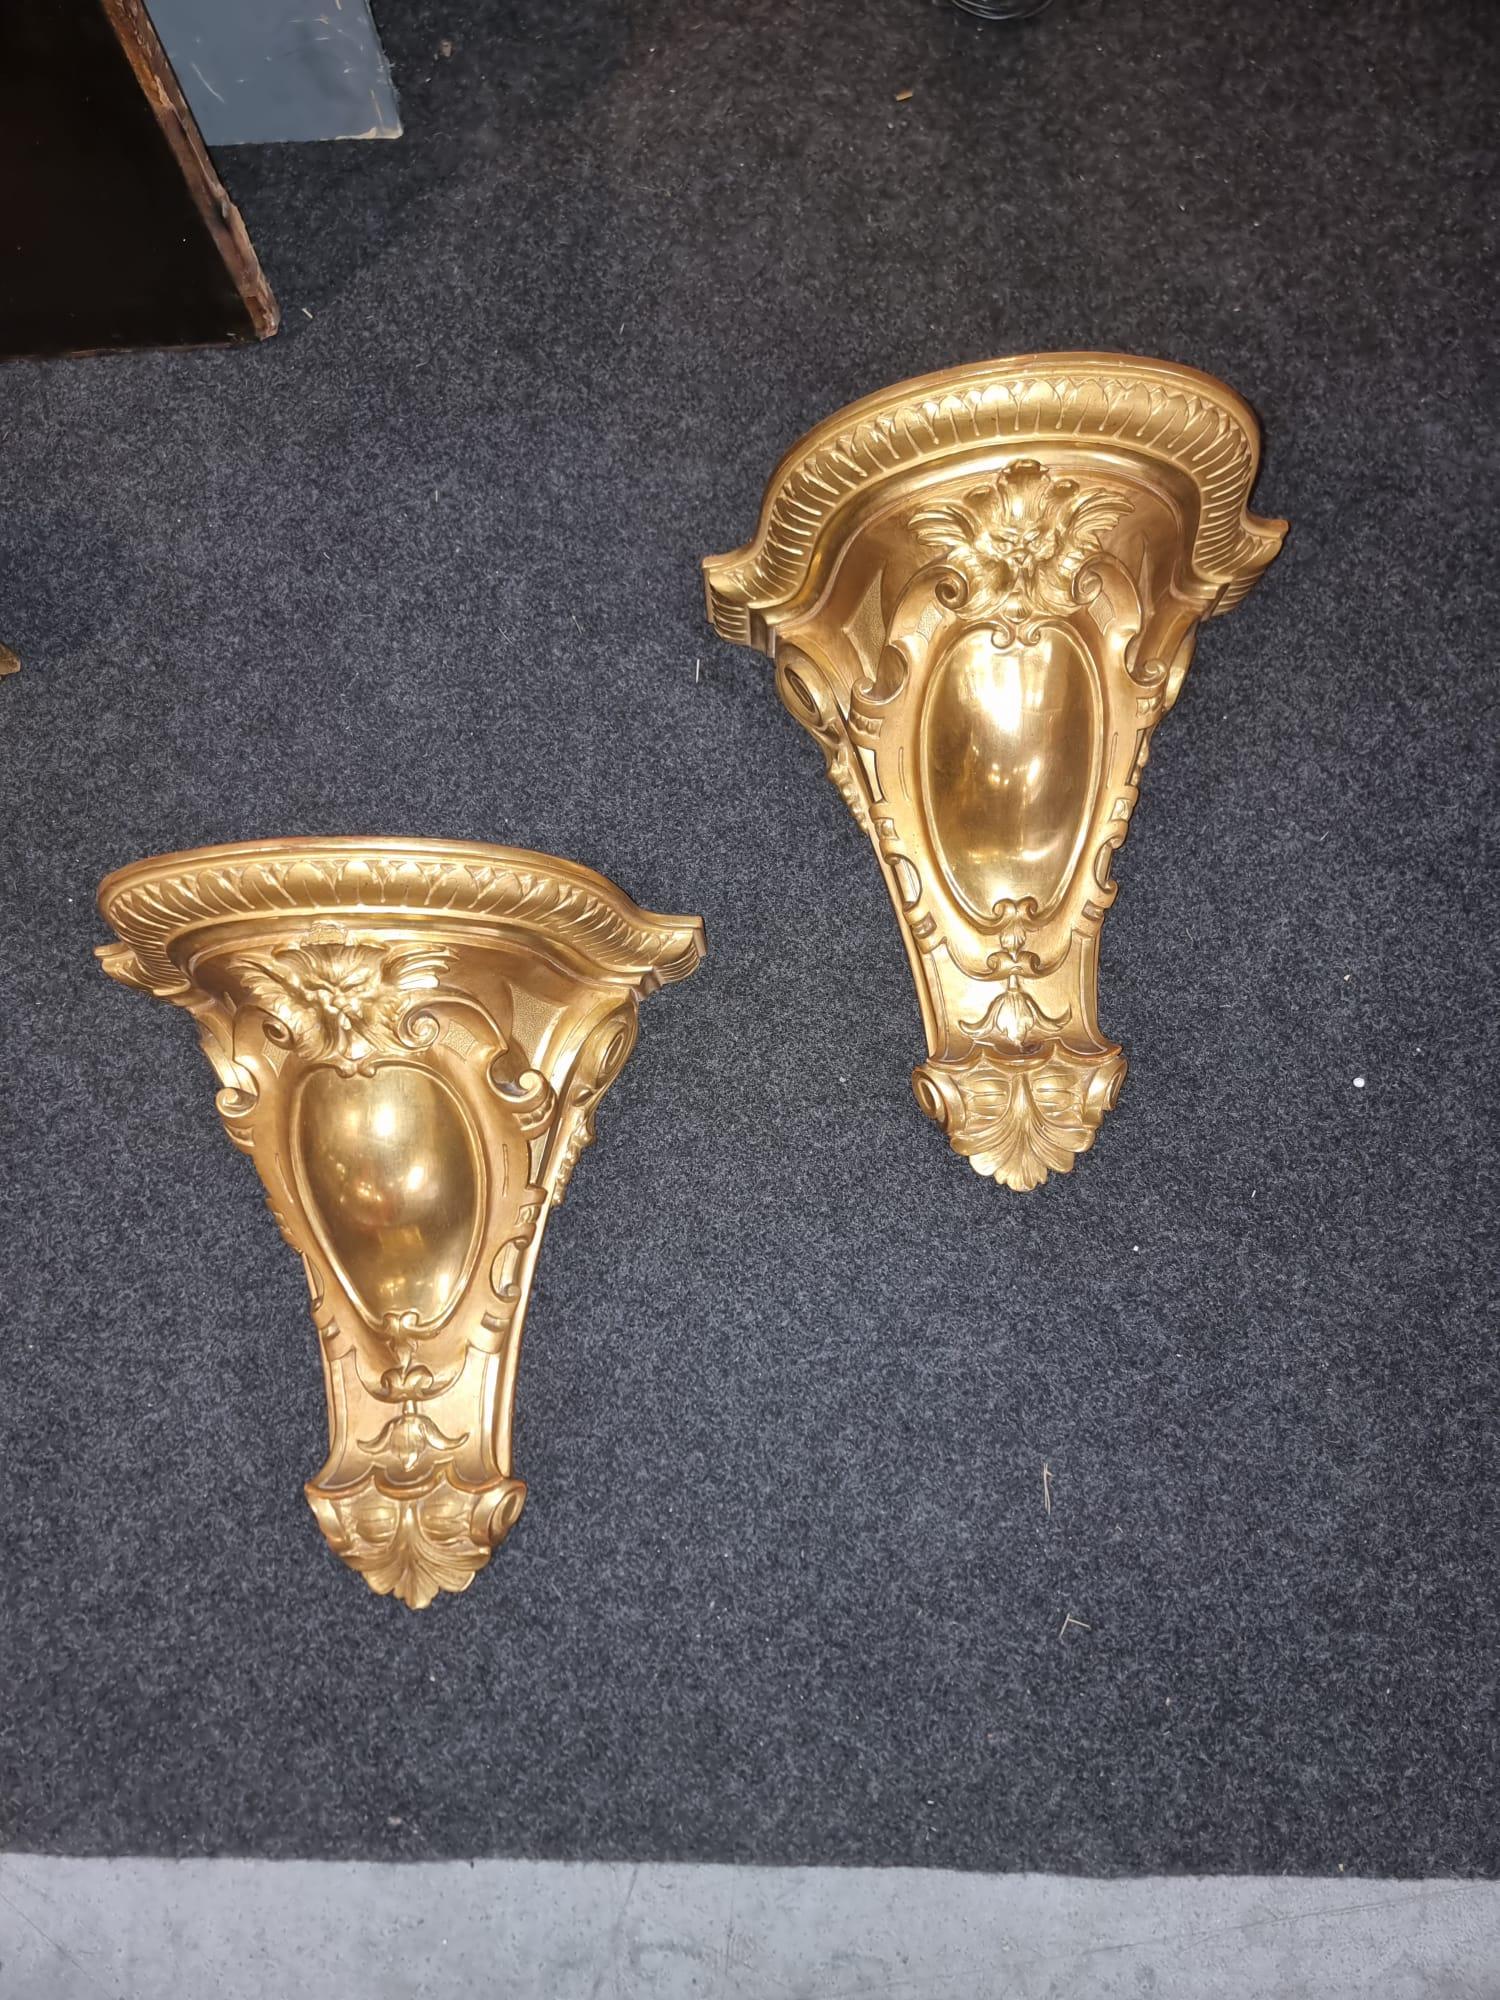 Beautiful pair of gilded and carved shelves, 1850-1870, Tuscany.

Dimensions: 30x28 cm with height 33 cm